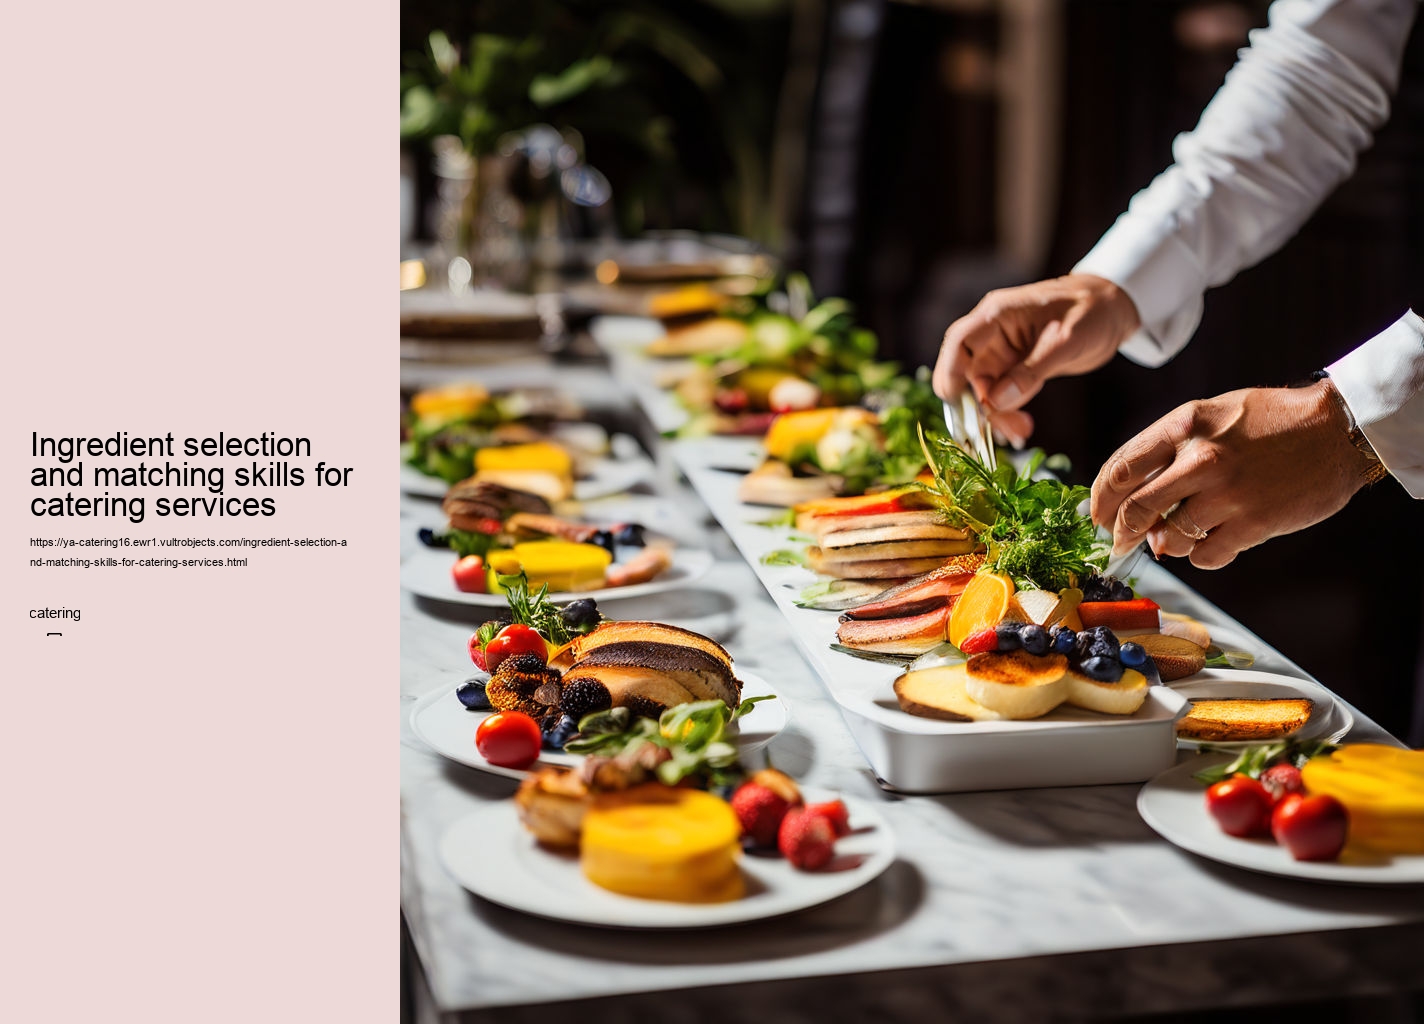 Ingredient selection and matching skills for catering services